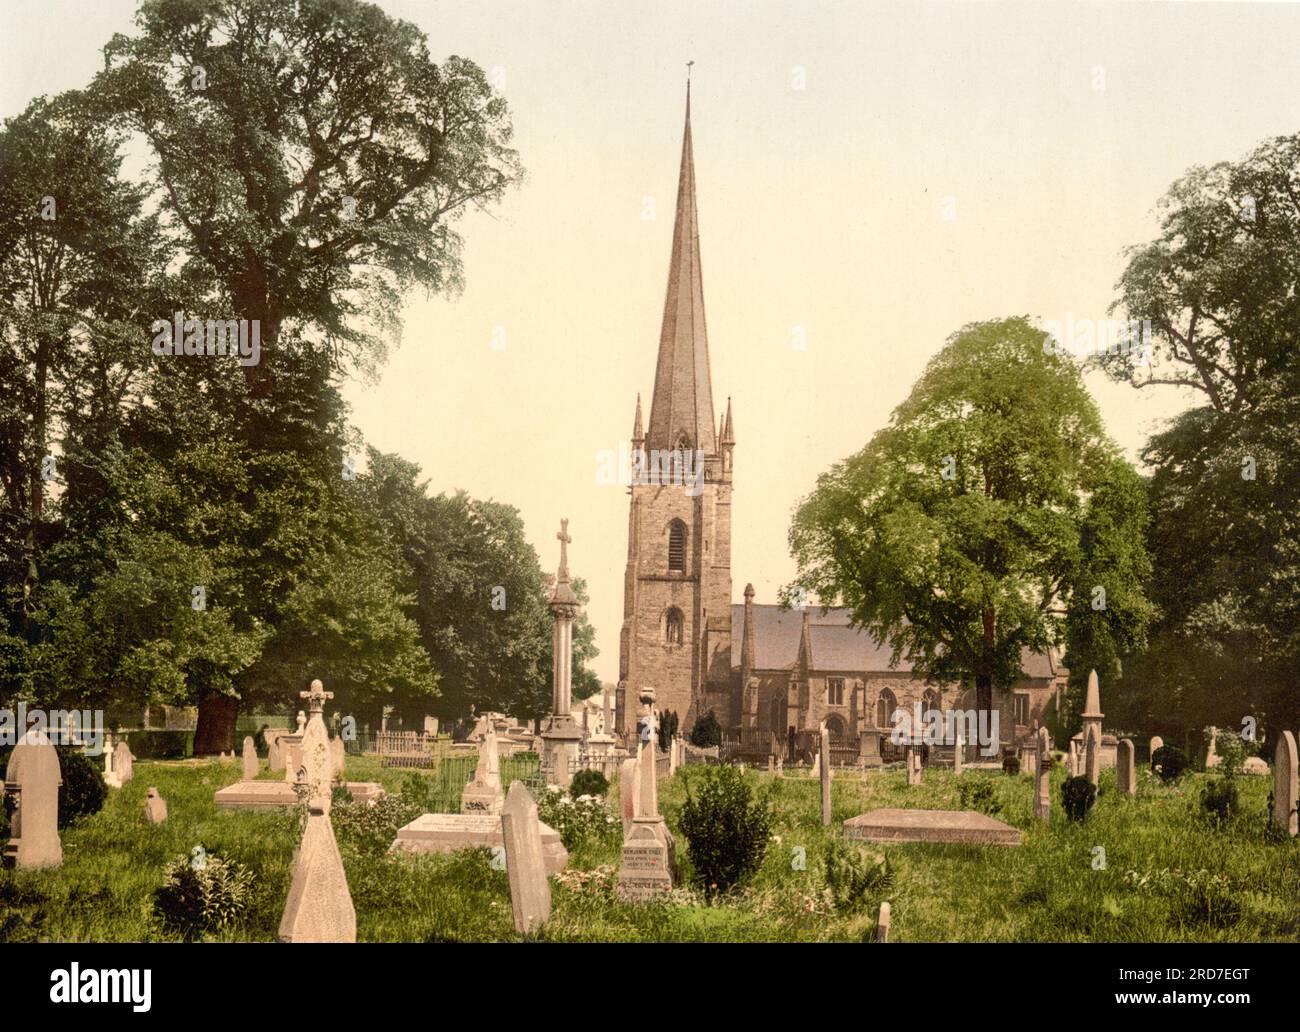 Church, Ross-on-Wye, a market town and civil parish in Herefordshire, England, 1895, Historical, digital improved reproduction of an old Photochrome print Stock Photo